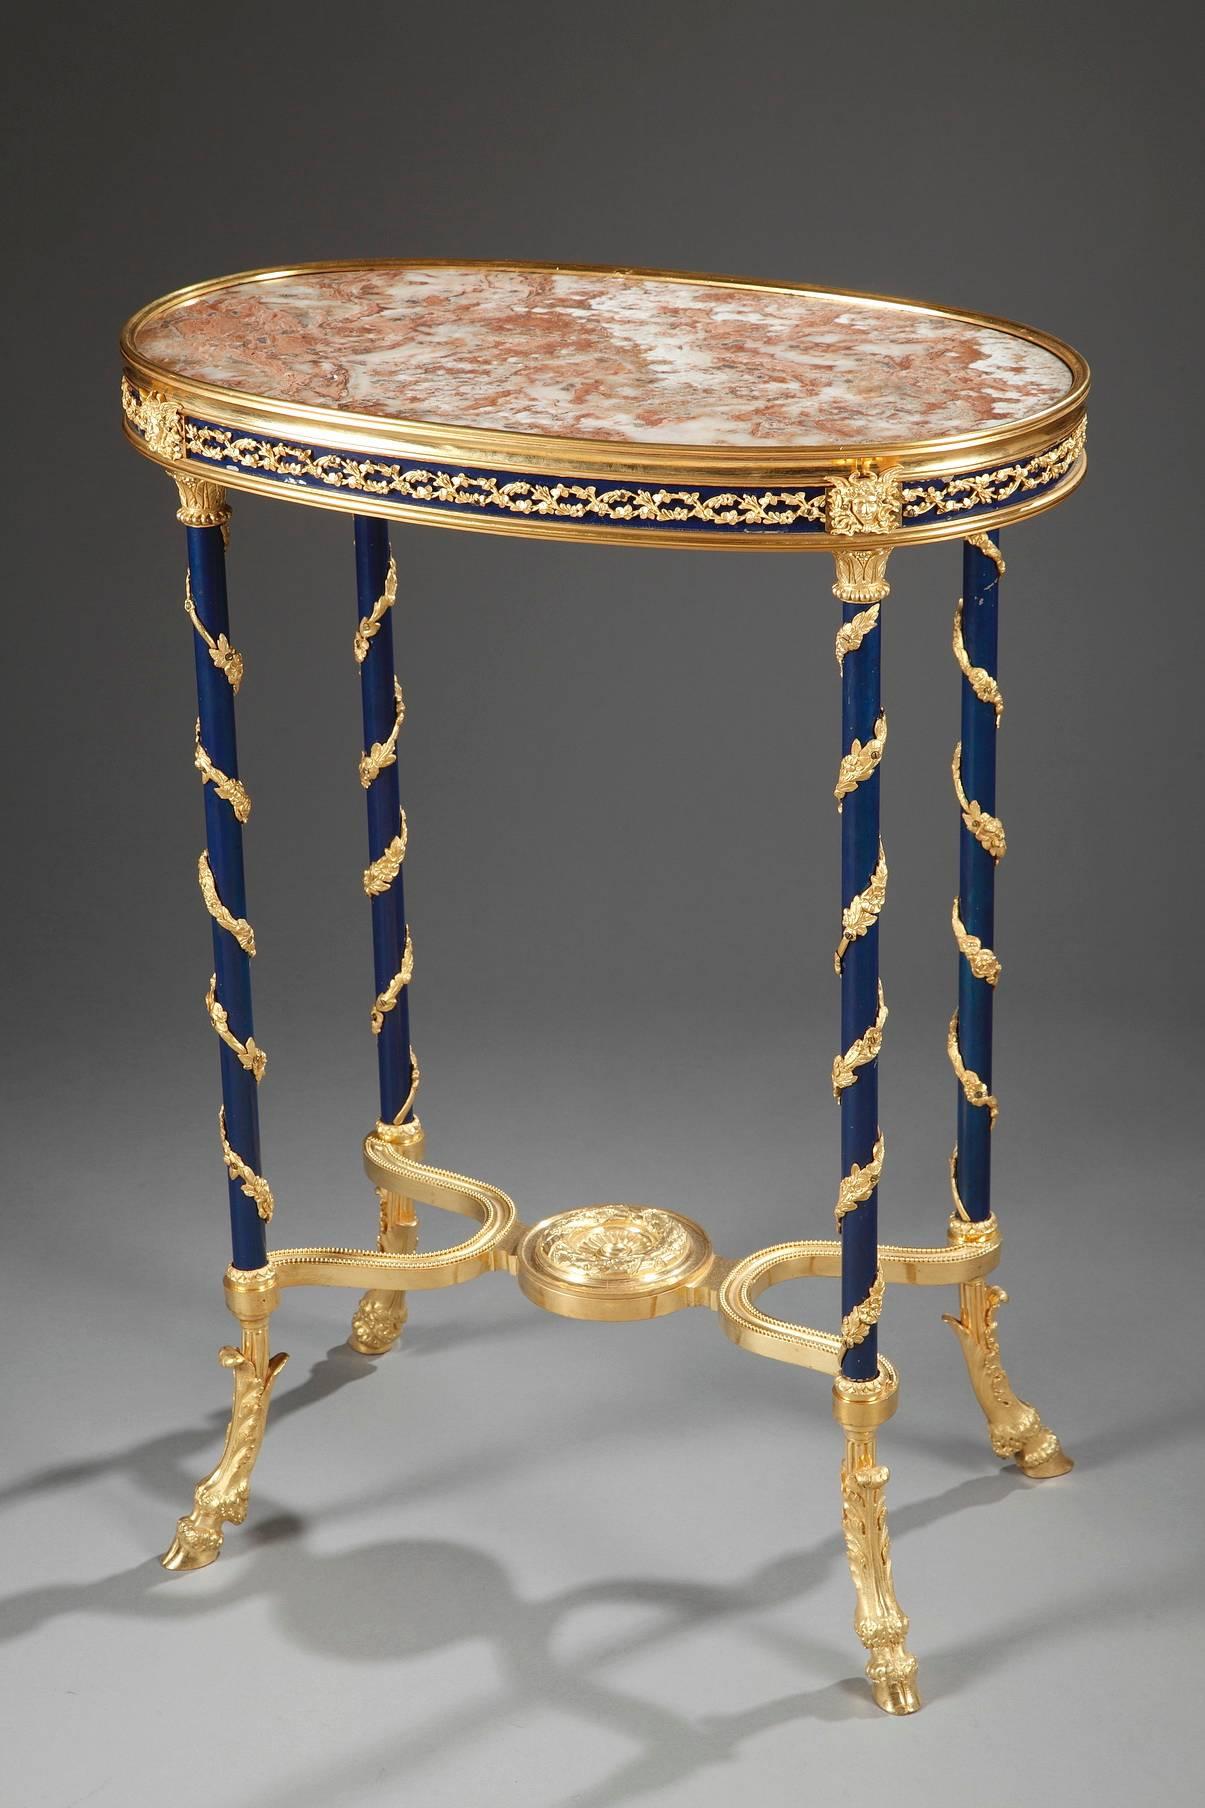 Gueridon with its oval, marble tray. The marble top is framed with an ormolu frieze of interlacing foliage set on a dark blue background. Masks interrupt the frieze above the four legs of the table, which are slender, dark-blue columns. The tops of